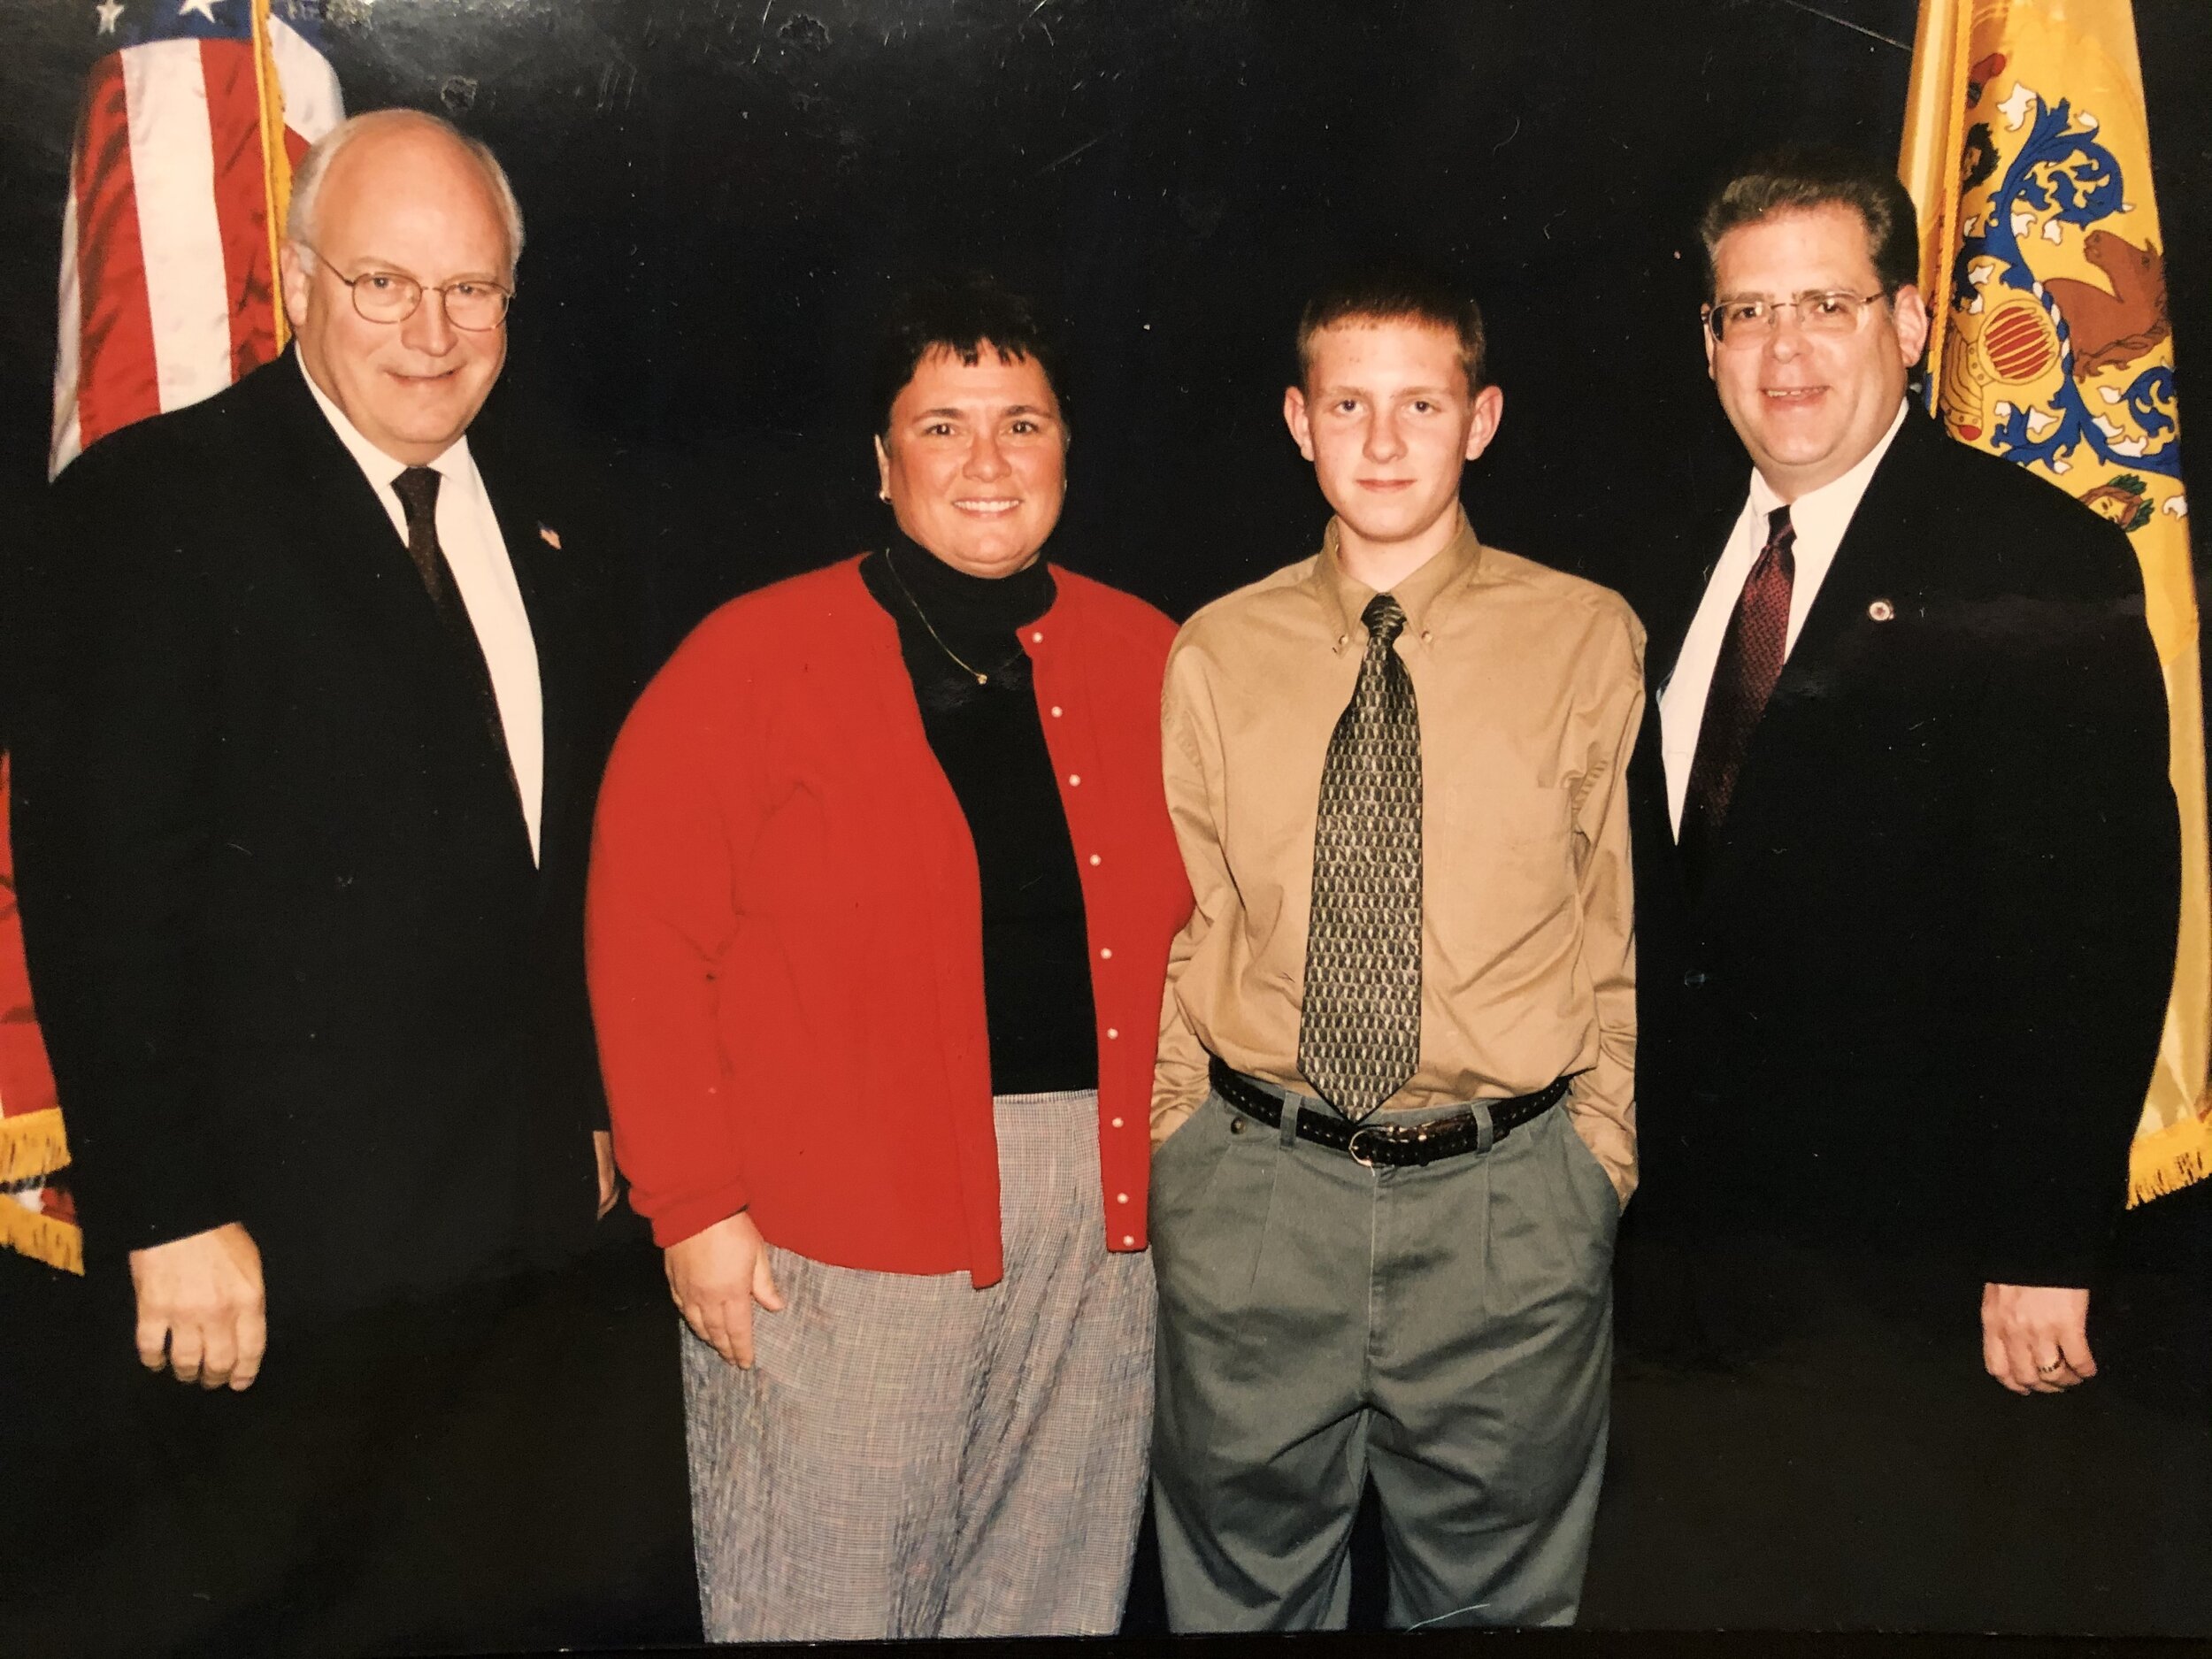  John and his family meets Vice Present Dick Cheney. 